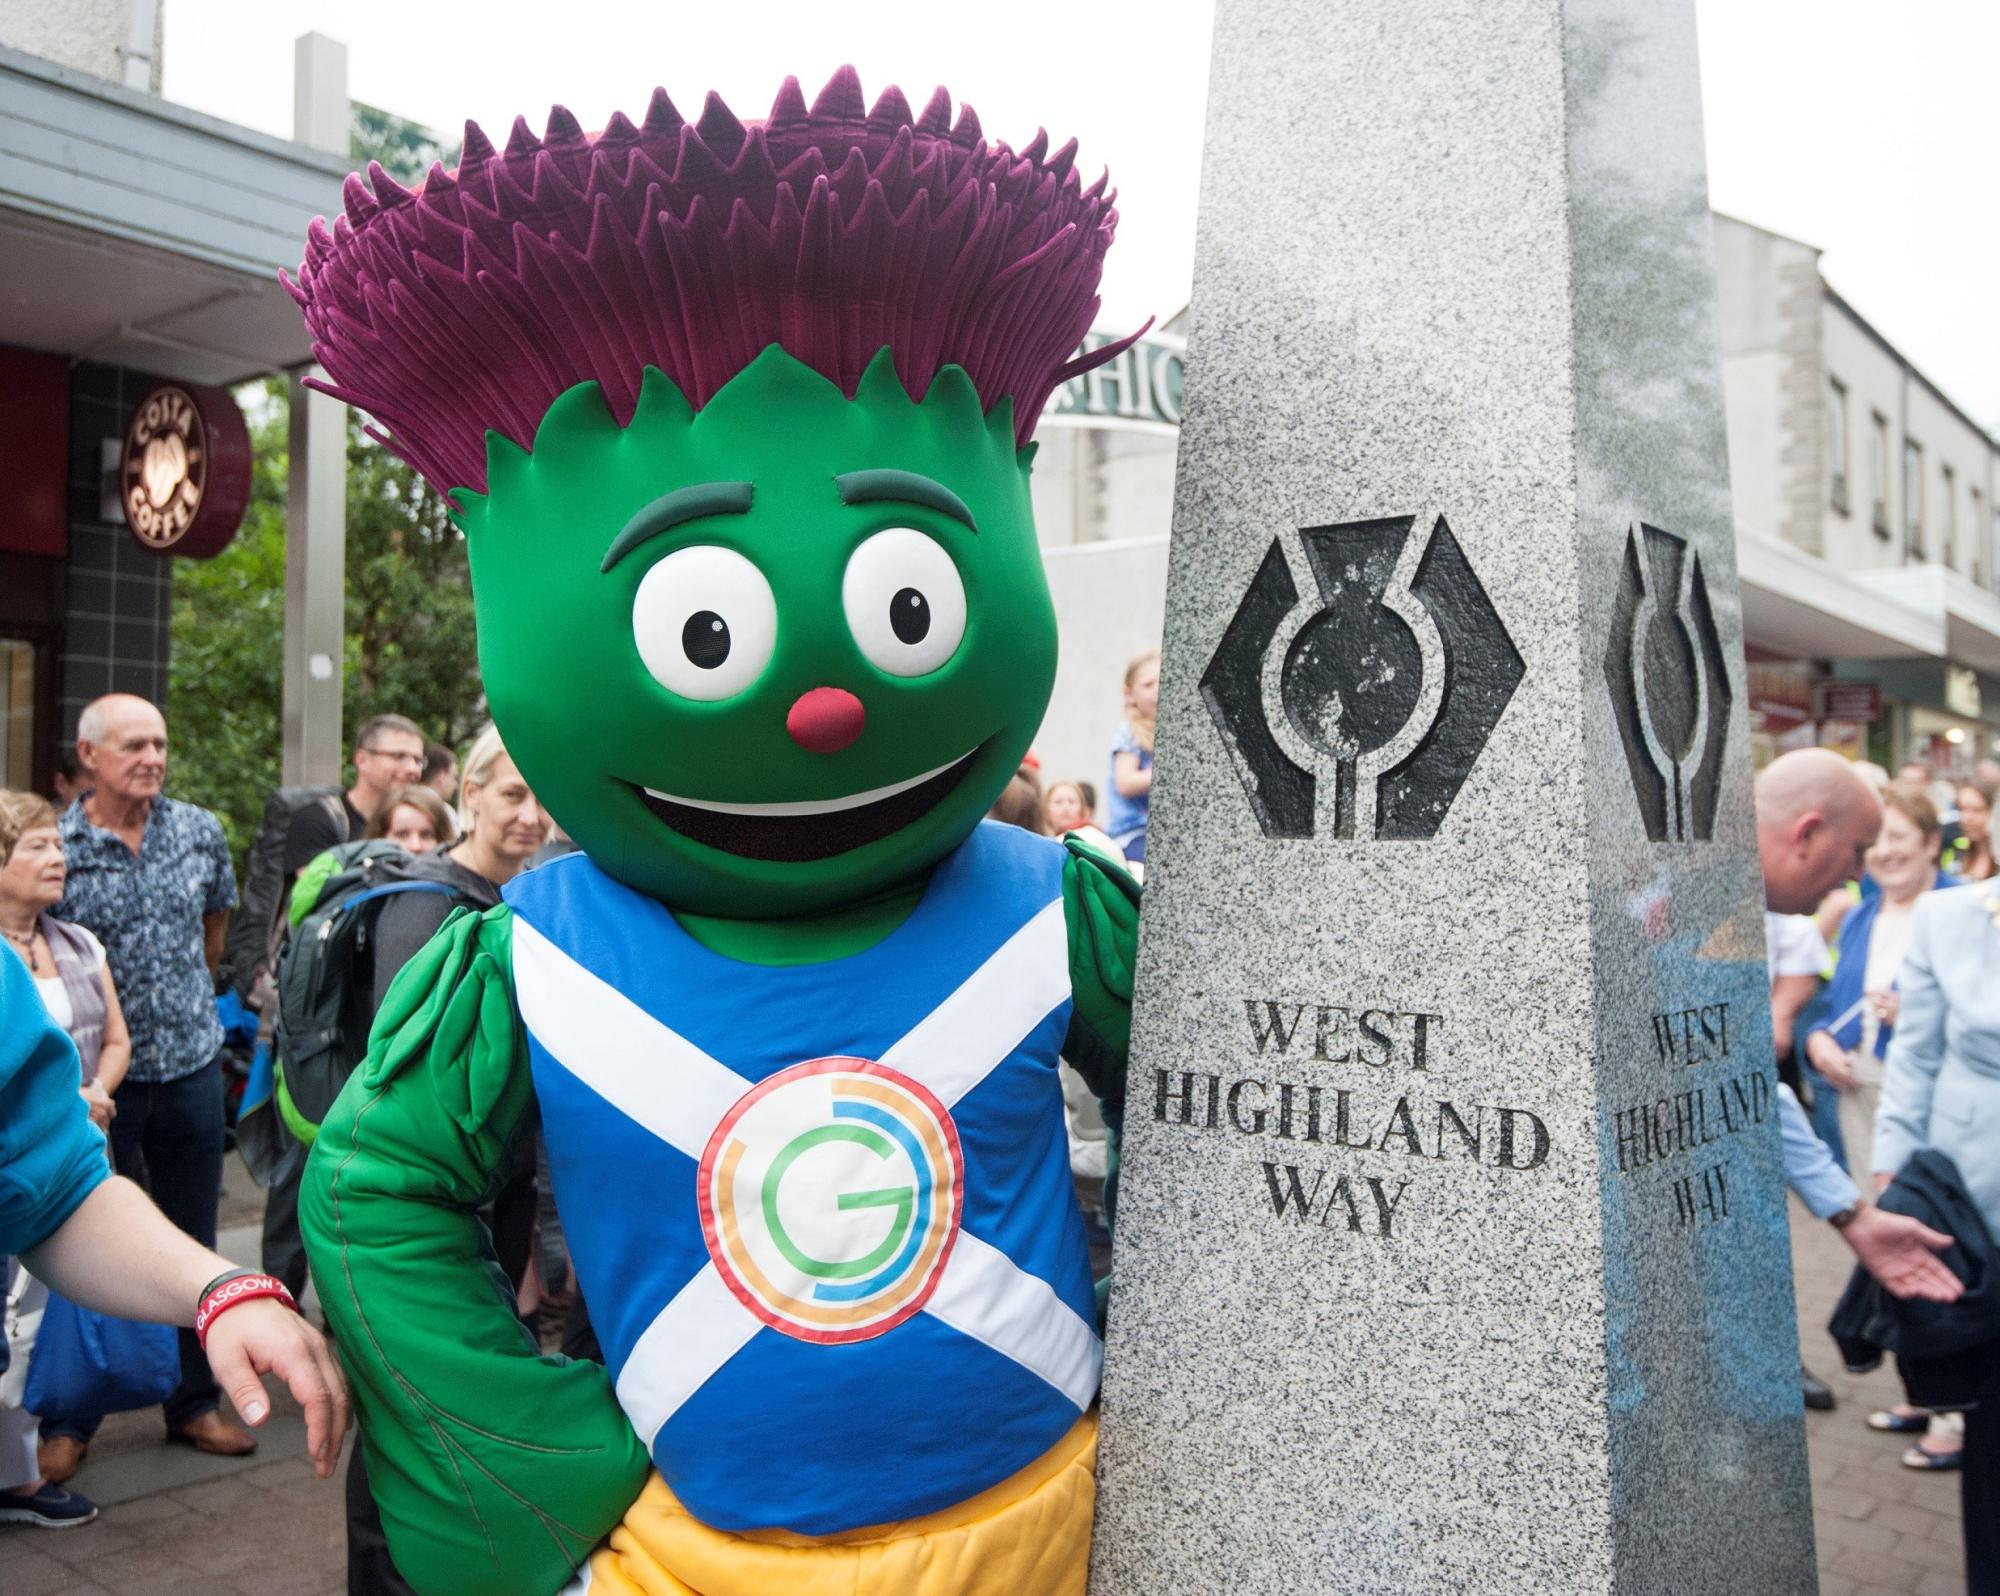 glasgow commonwealth games mascot at the start of the west highland way